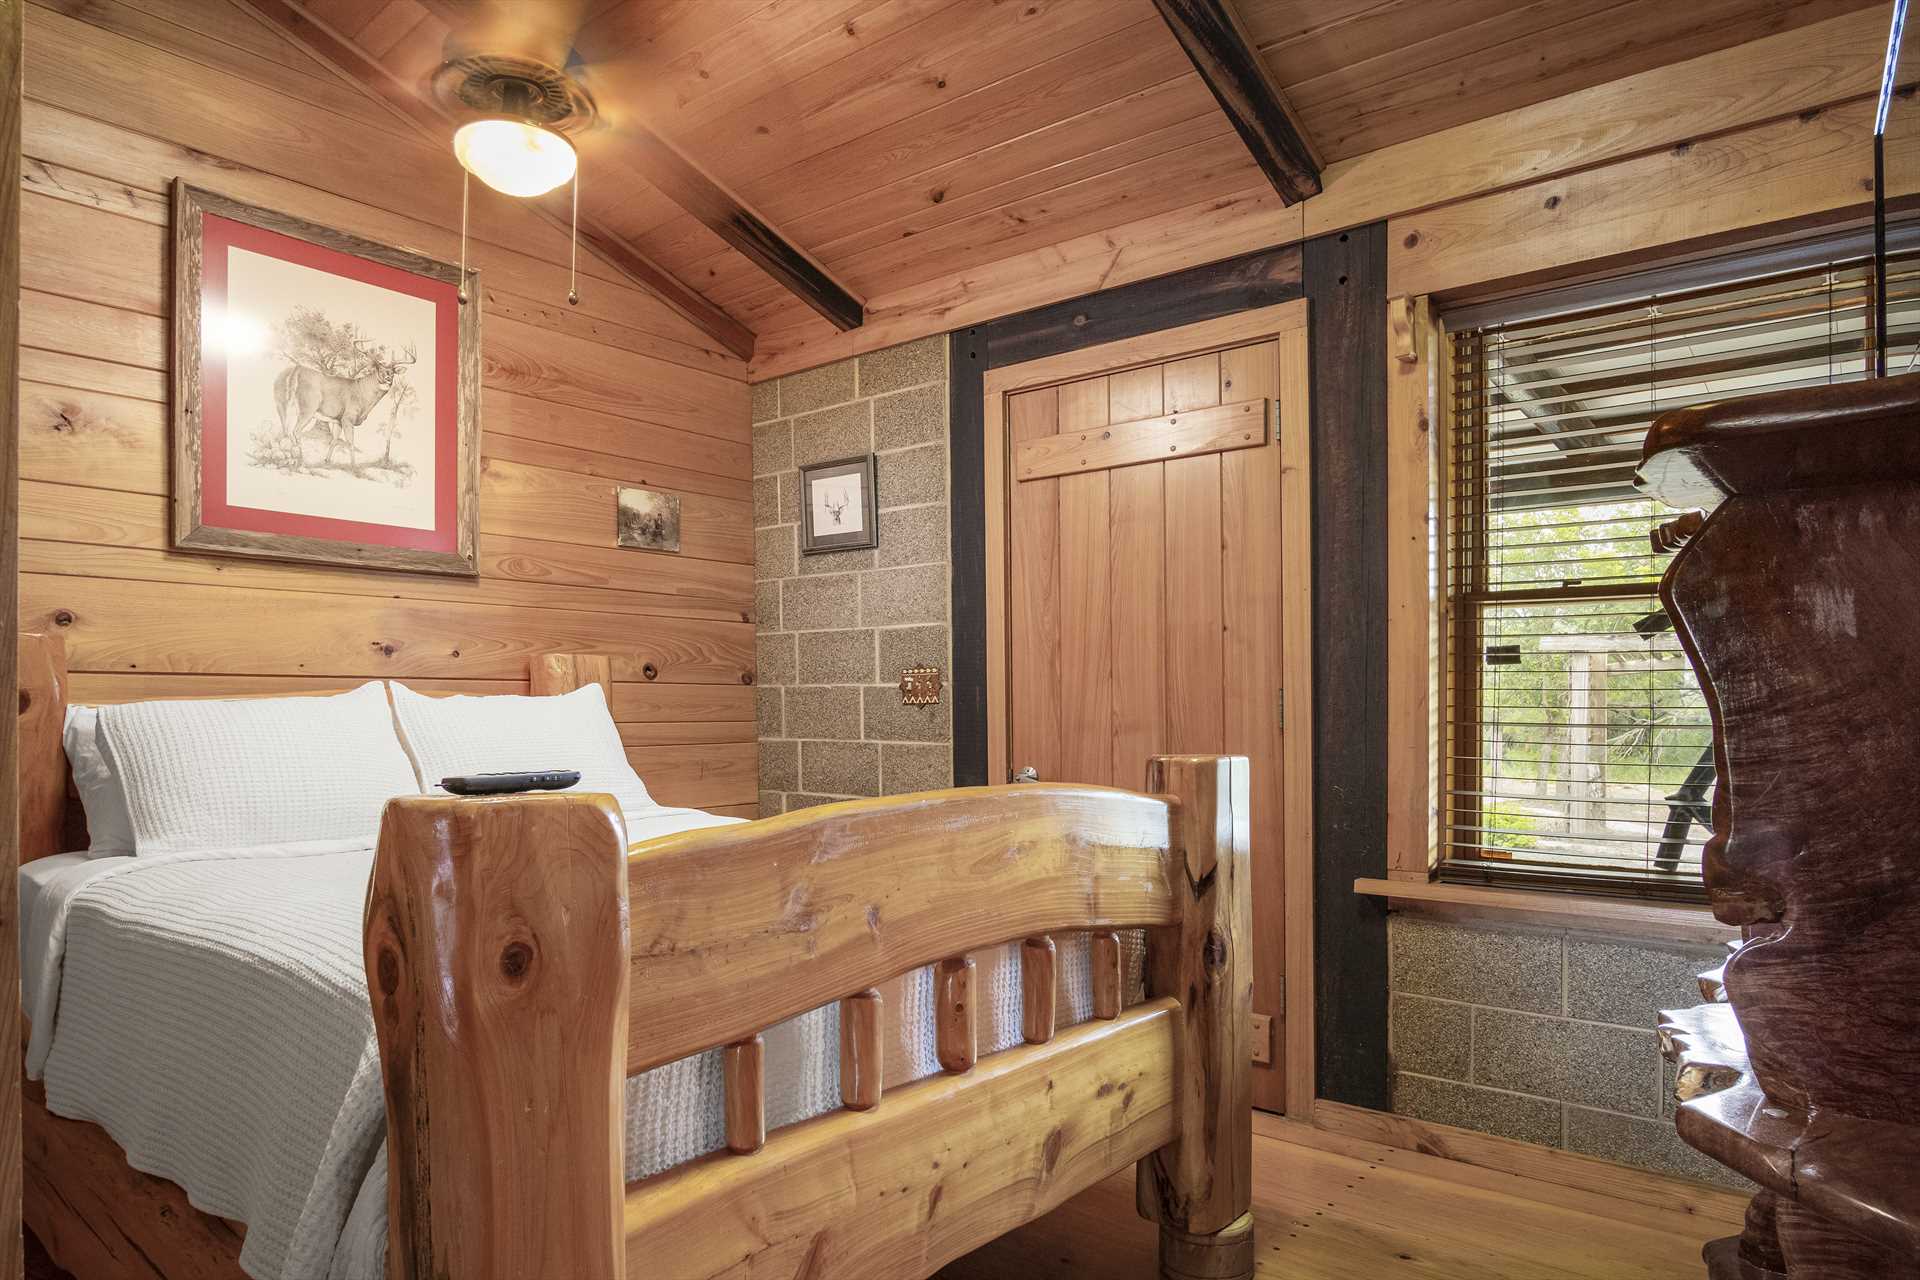                                                 The Whitetail Room features a queen-sized bed, with a custom frame built by the Lodge's original owner! Clean linens are included, too.